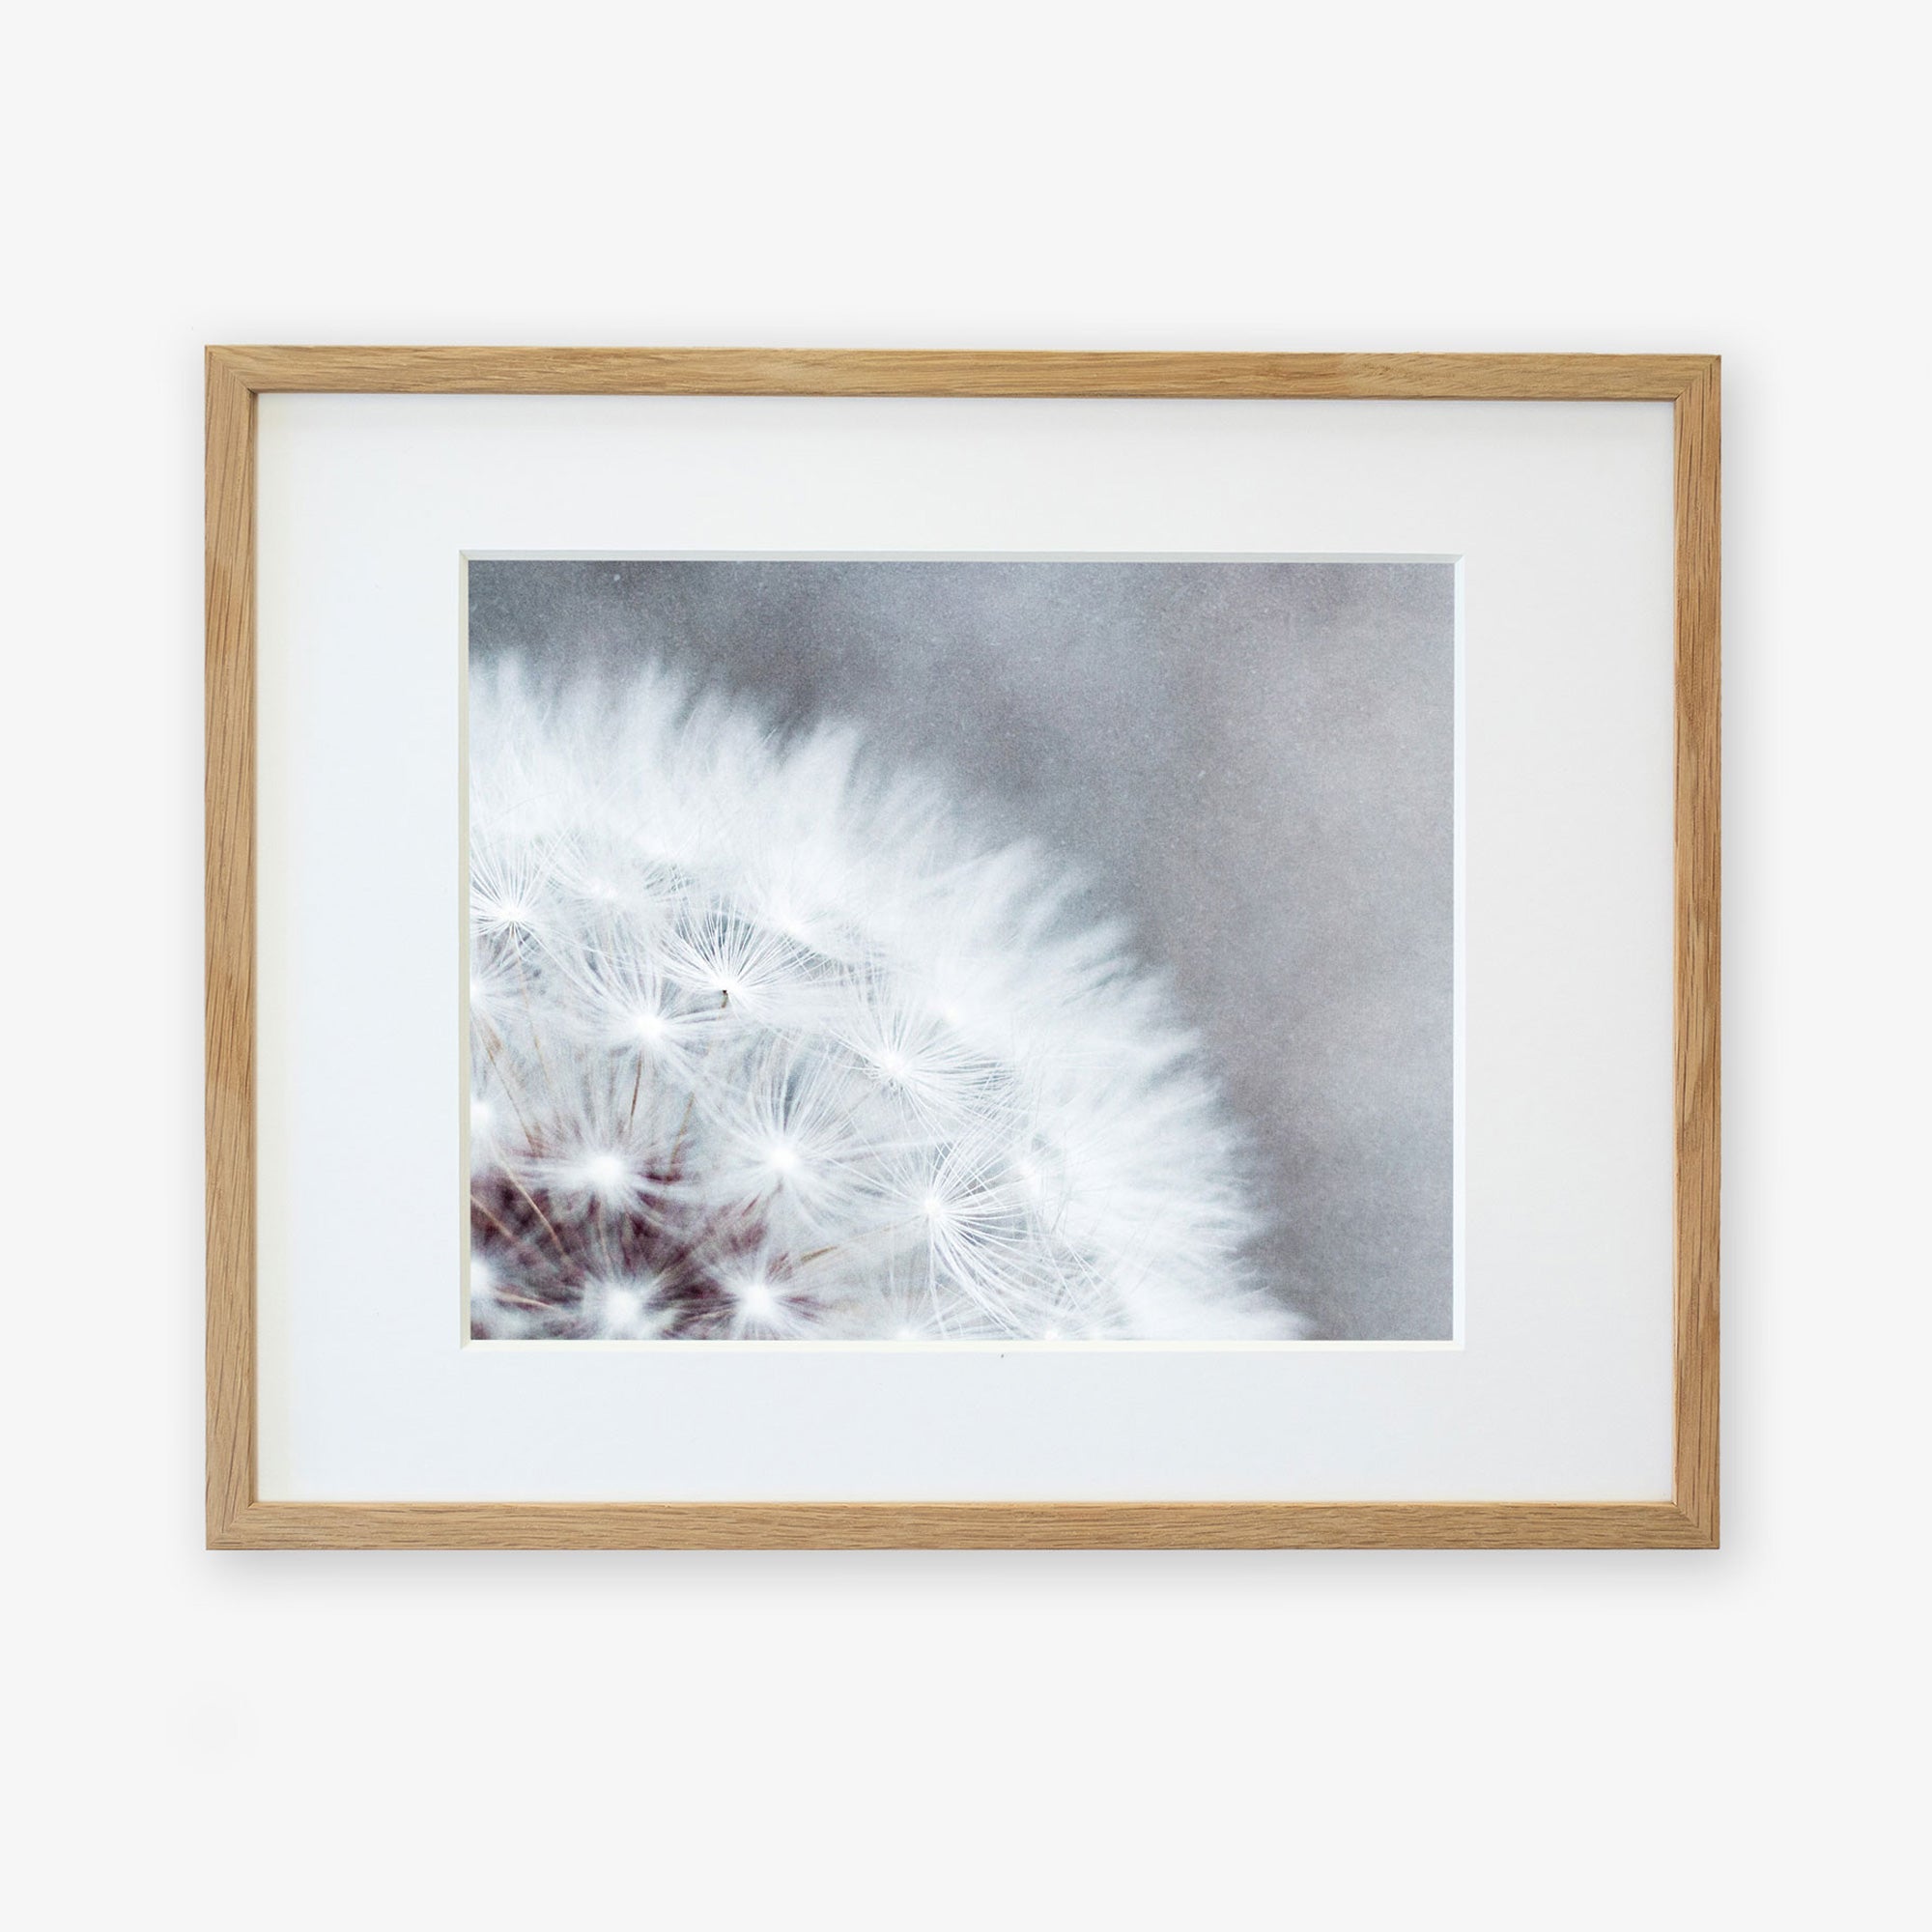 A framed Grey Botanical Print, 'Dandelion Queen' by Offley Green, displaying delicate white fluff and seeds of a dandelion tuft, mounted on a wall with a light wooden frame and white matte border.